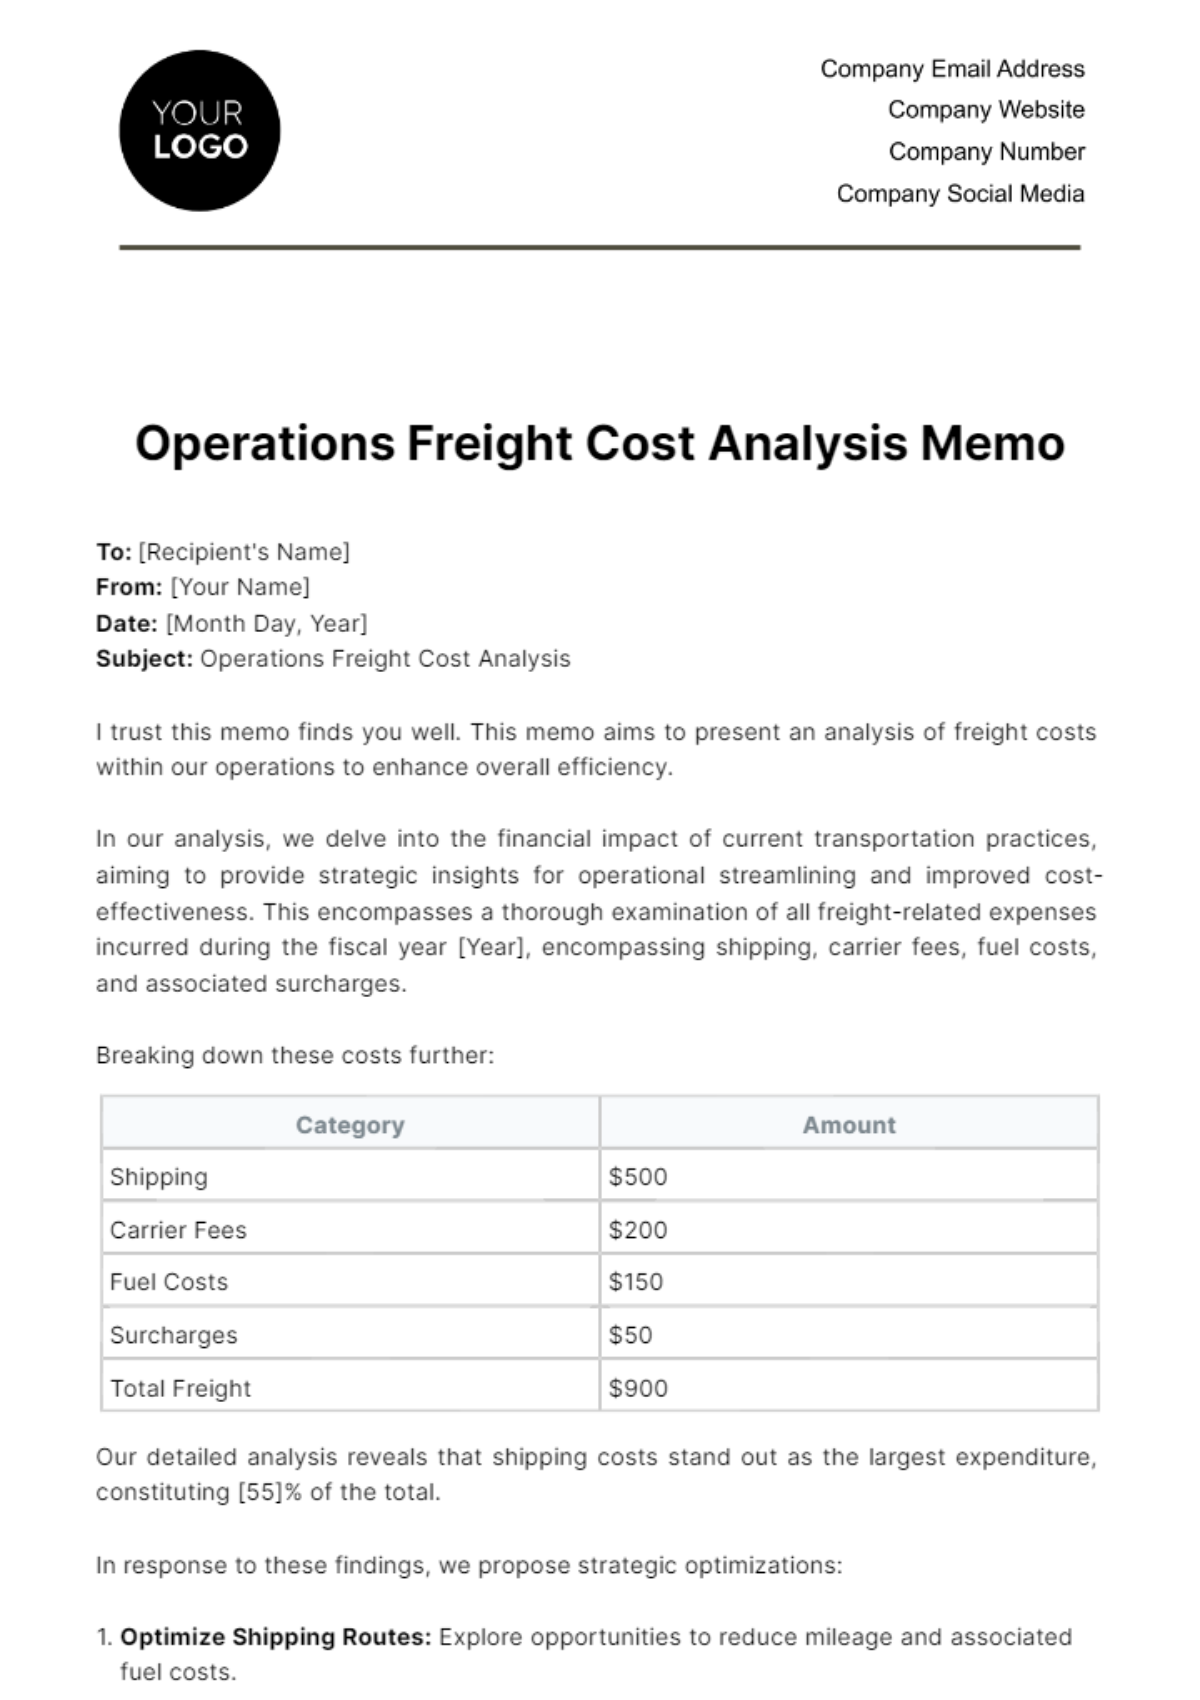 Free Operations Freight Cost Analysis Memo Template